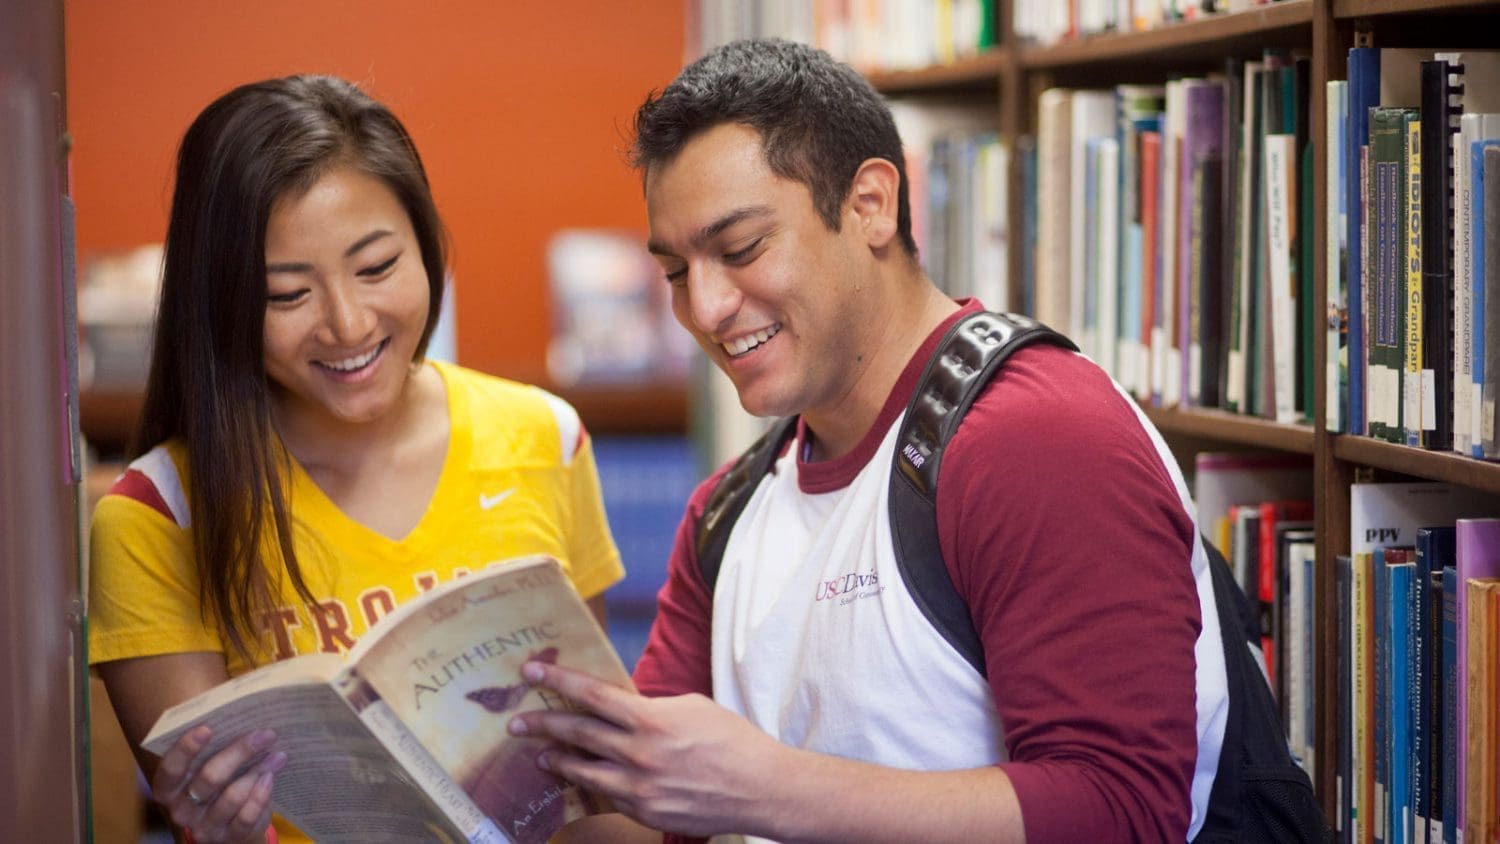 Two students wearing USC shirts, smiling and sharing a book at the library